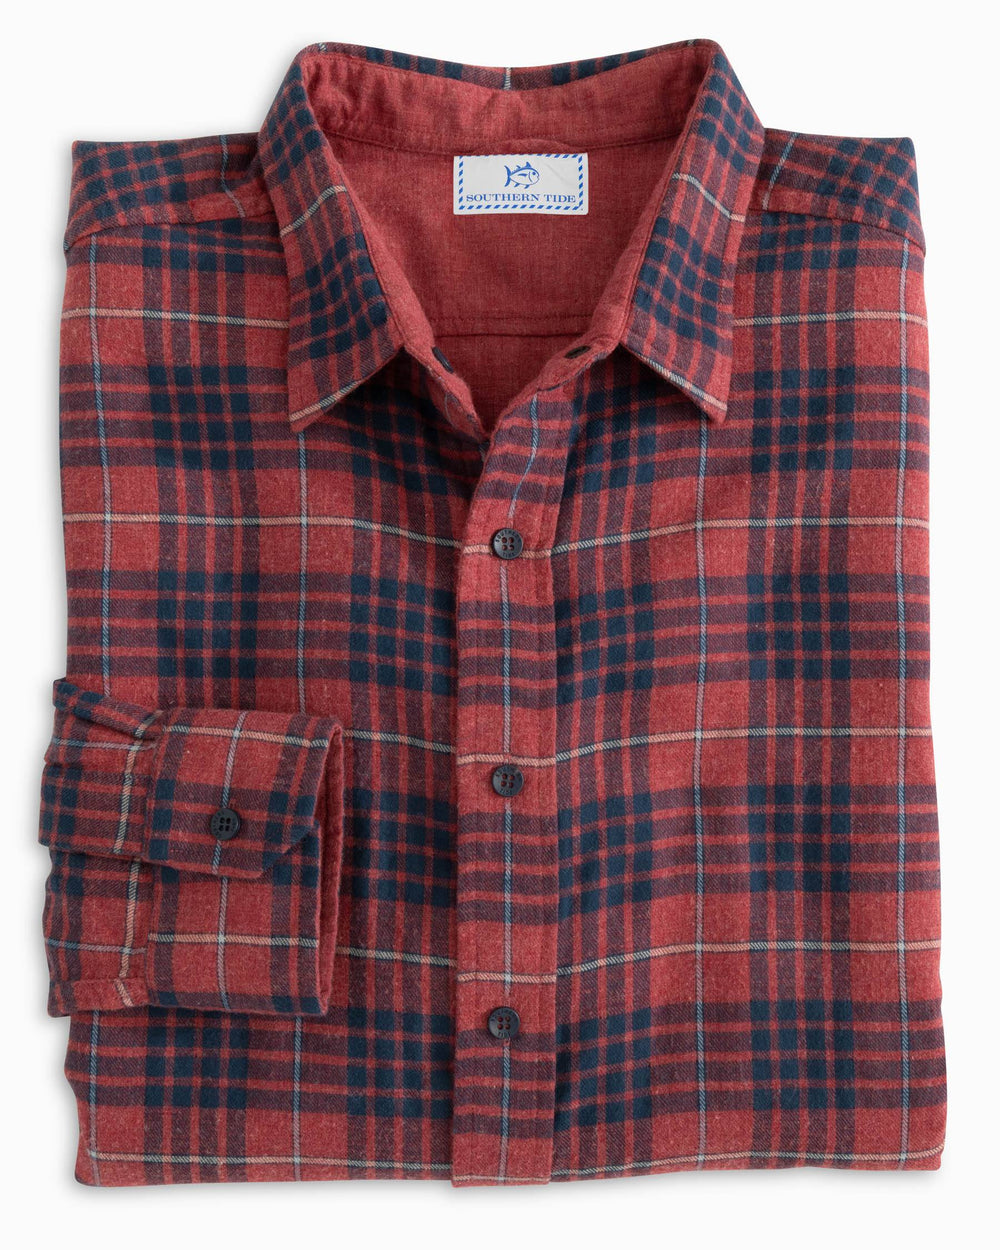 The folded view of the Southern Tide Payton Heather Reversible Plaid Sport Shirt by Southern Tide - Heather Tuscany Red